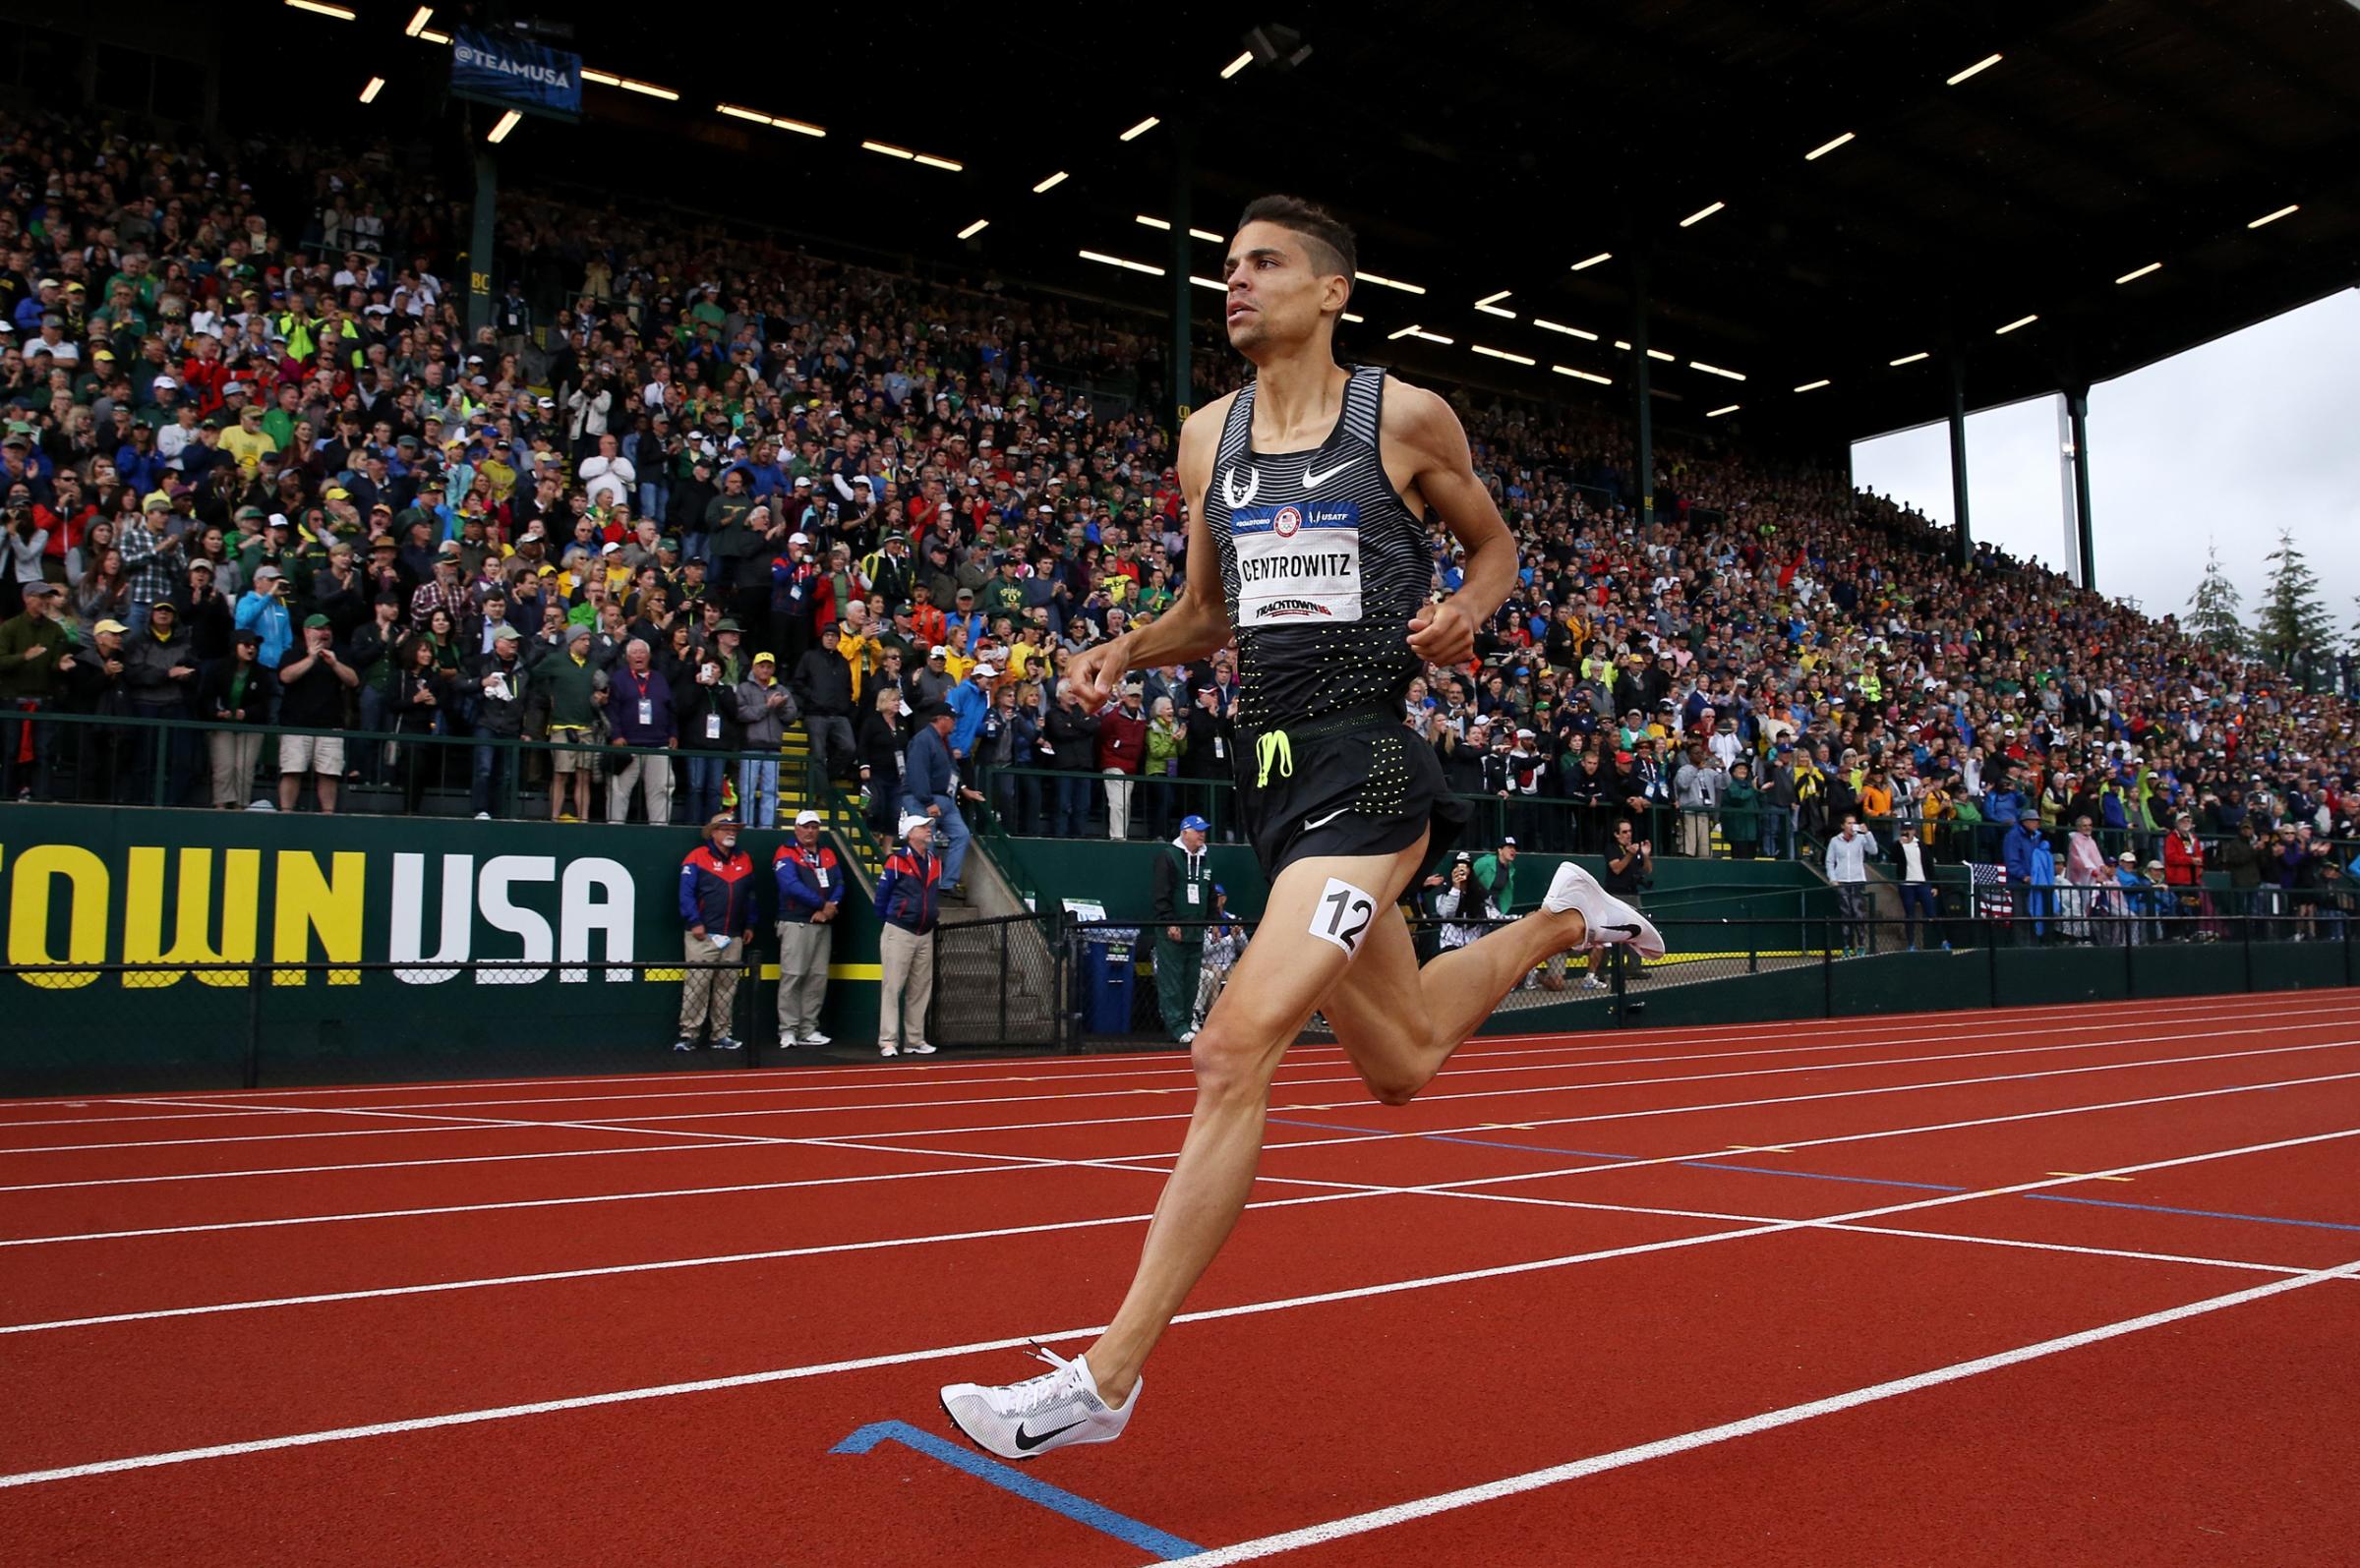 Matthew Centrowitz—Centrowitz’s father Matt Sr. ran for the U.S. at the 1976 and 1980 Games. Matt Jr. finished fourth in London in 2012 and set an Olympic-trials record this year in the 1,500 m, giving him a shot to medal in Rio.